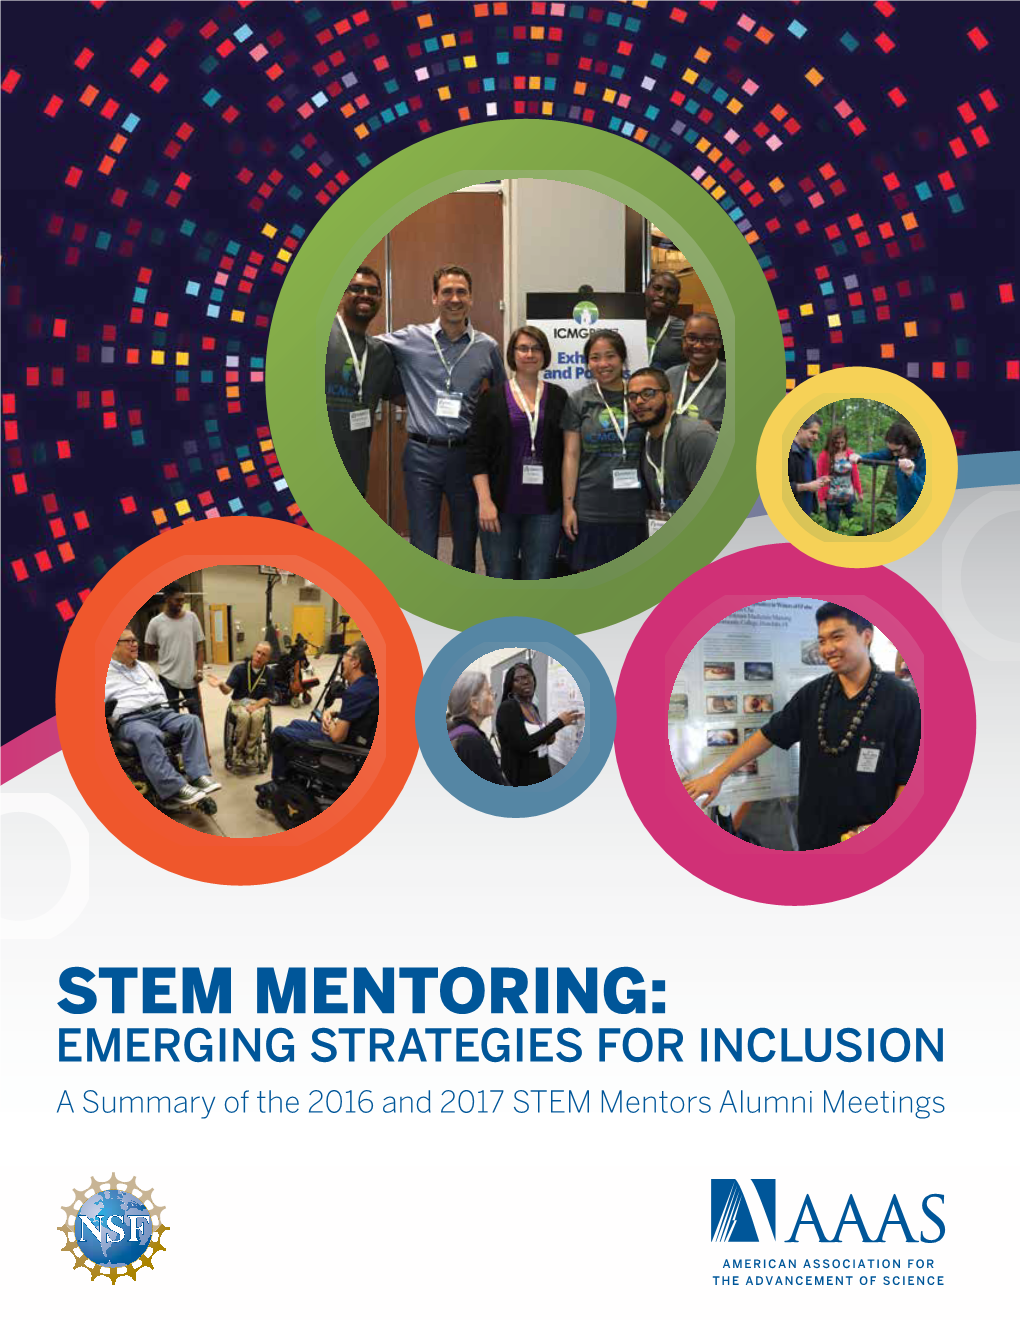 STEM Mentoring: Emerging Strategies and Inclusion